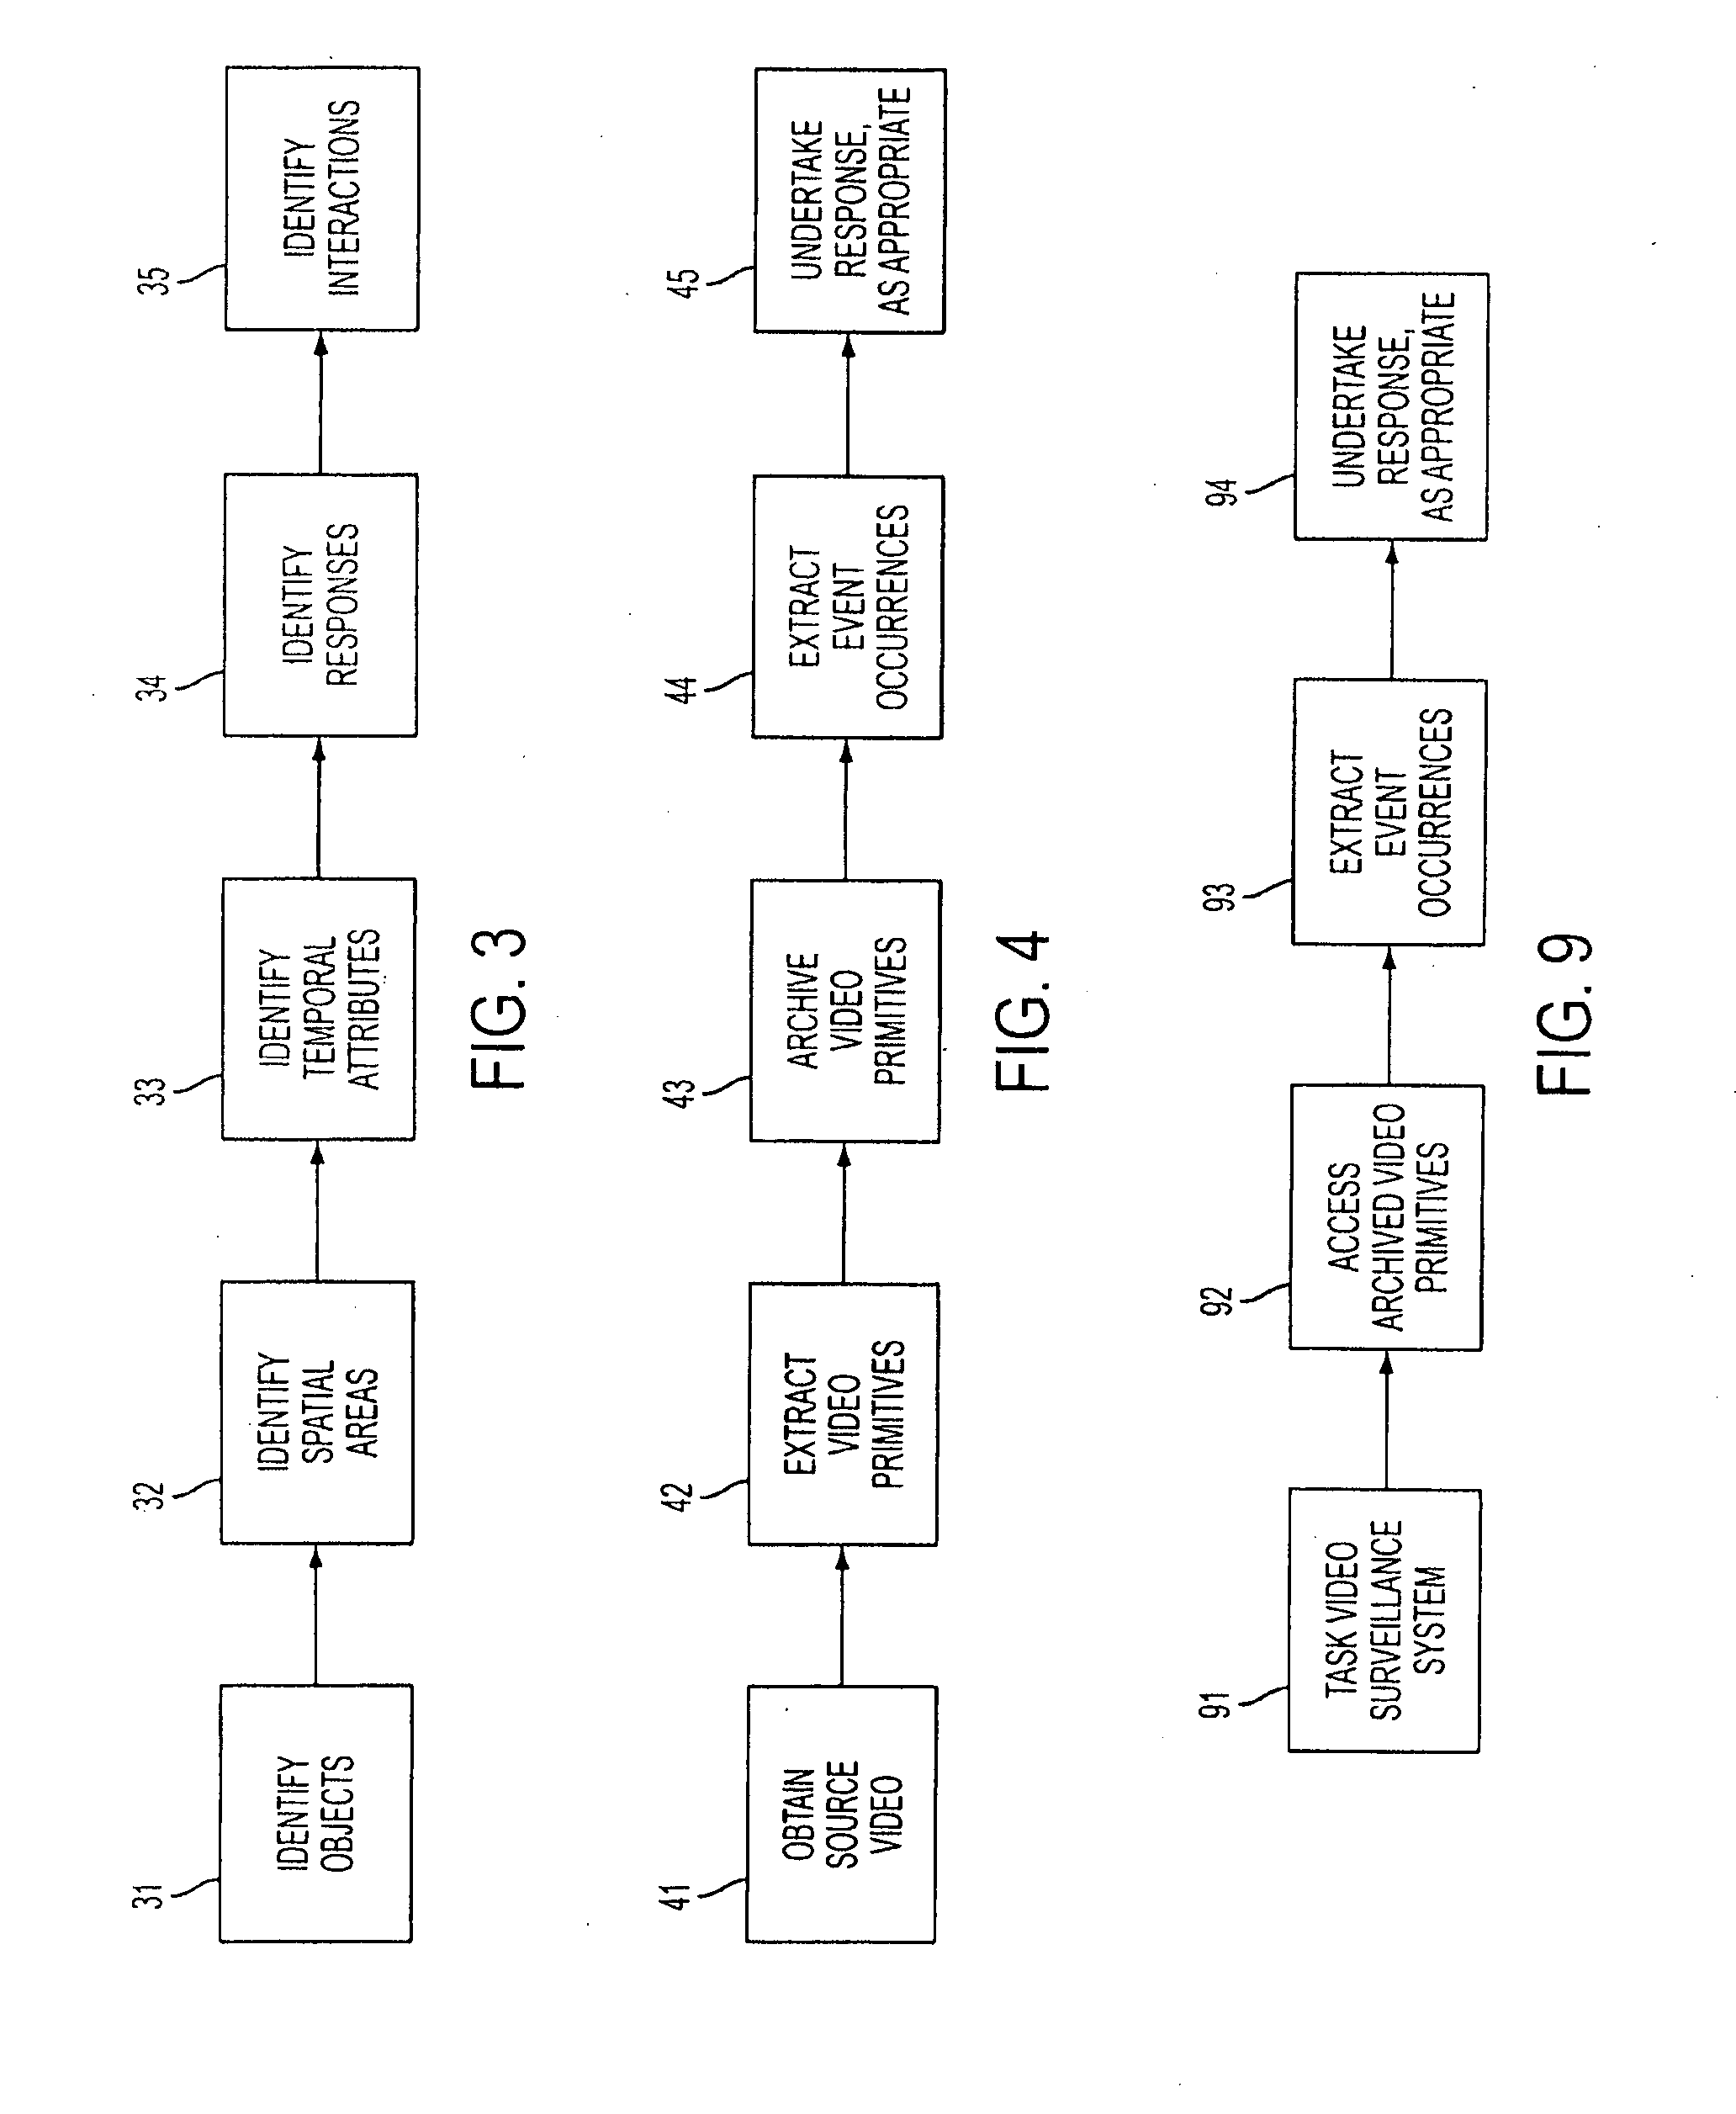 Video analytic rule detection system and method